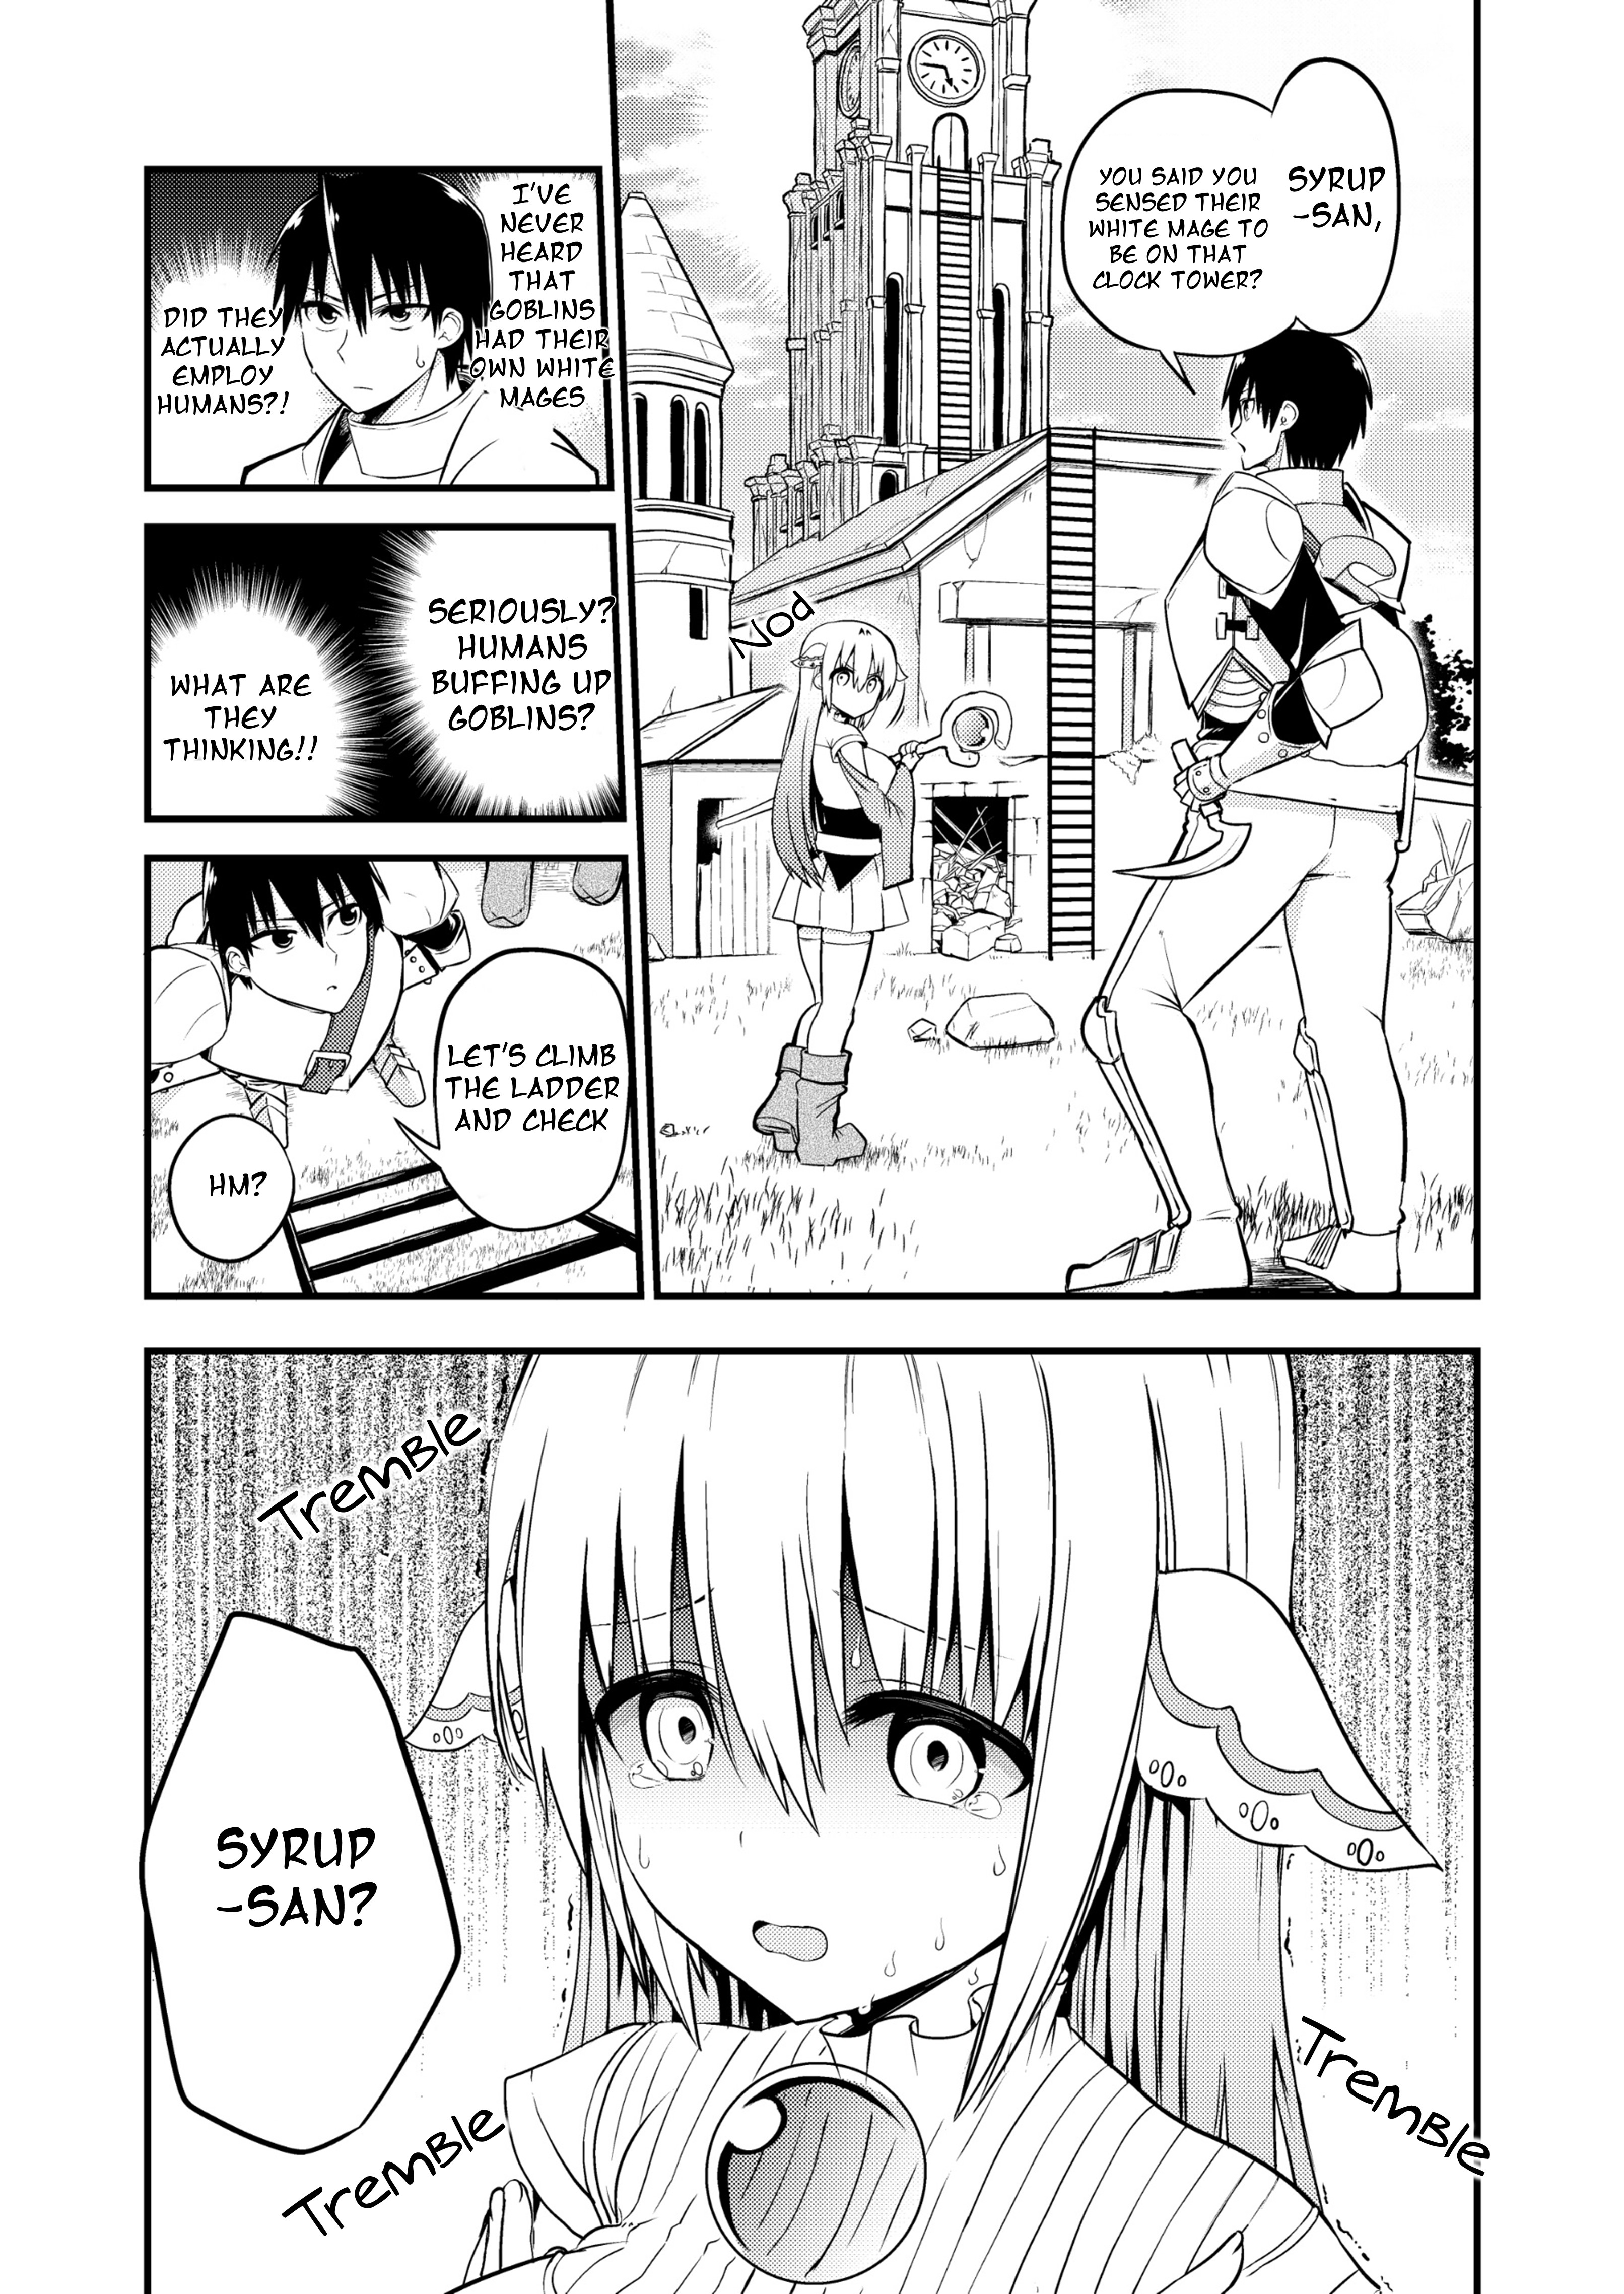 Shiro Madoushi Syrup-San Vol.1 Chapter 18: White Mage Syrup-San Overcoming Her Fear - Picture 1